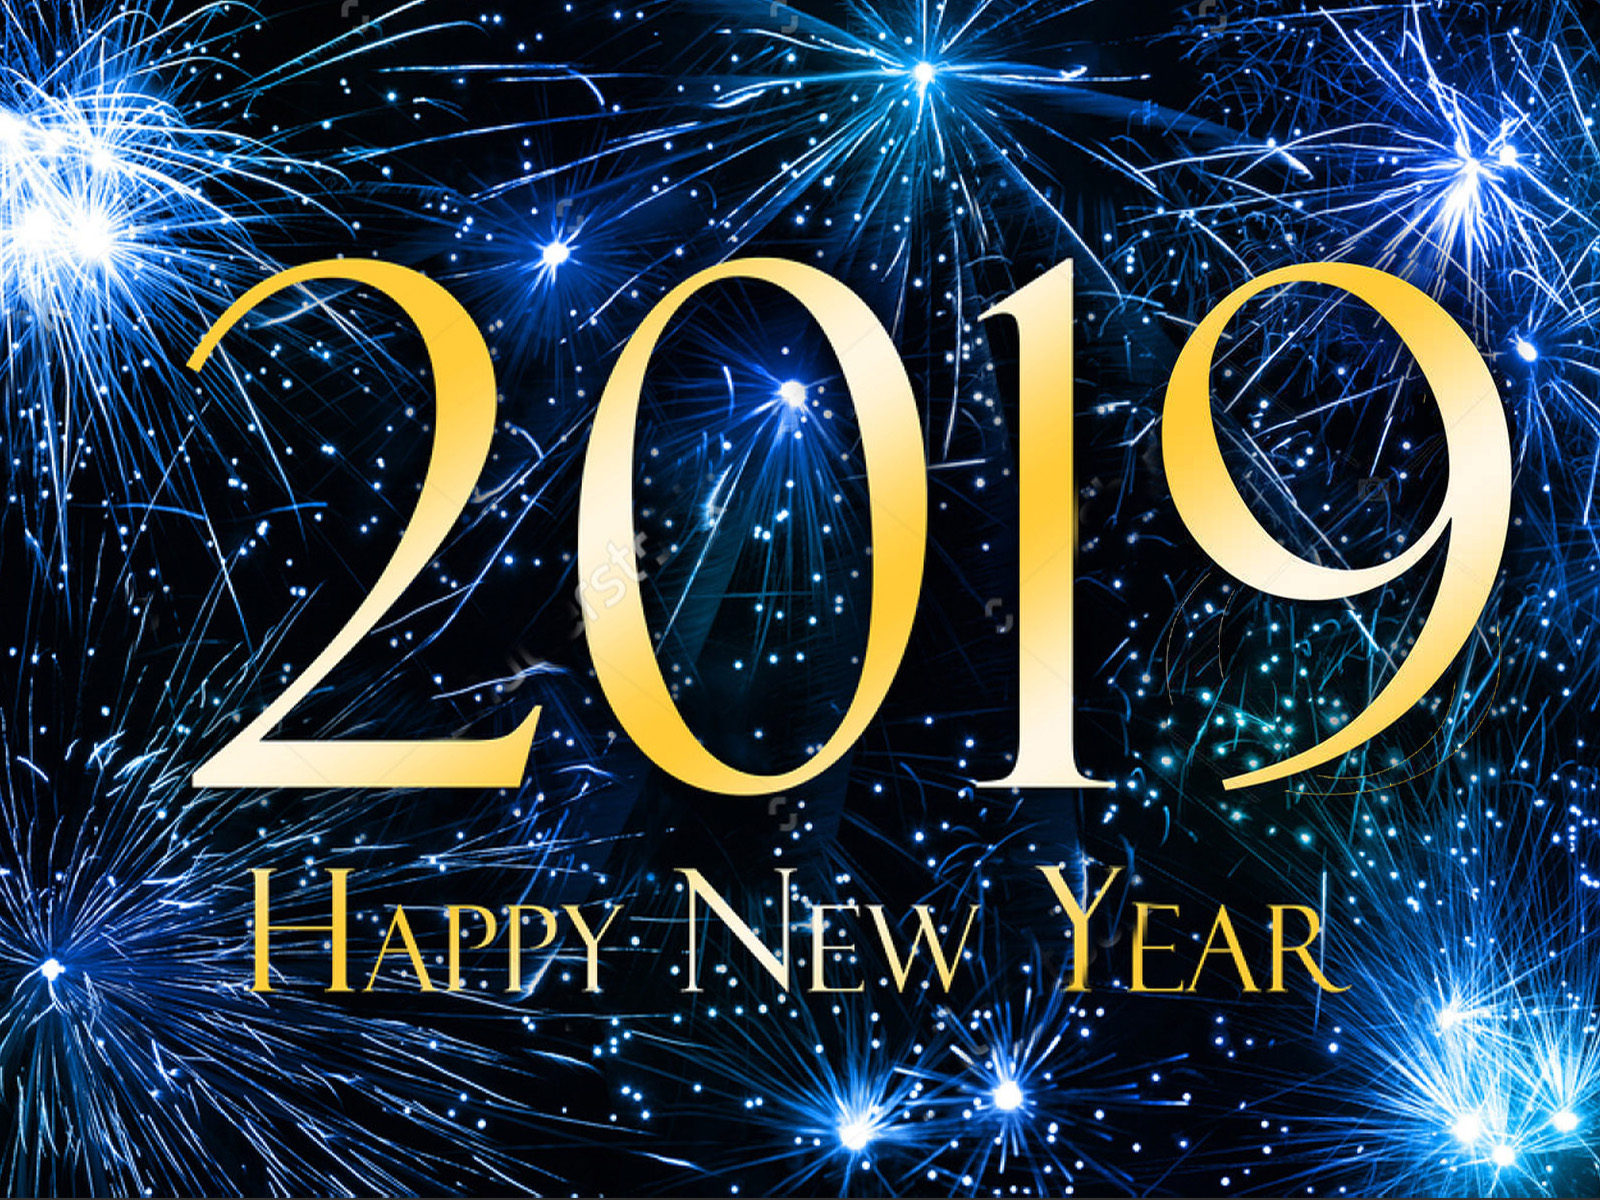 Happy New Year 2019 Free Download 570344 Hd Wallpaper